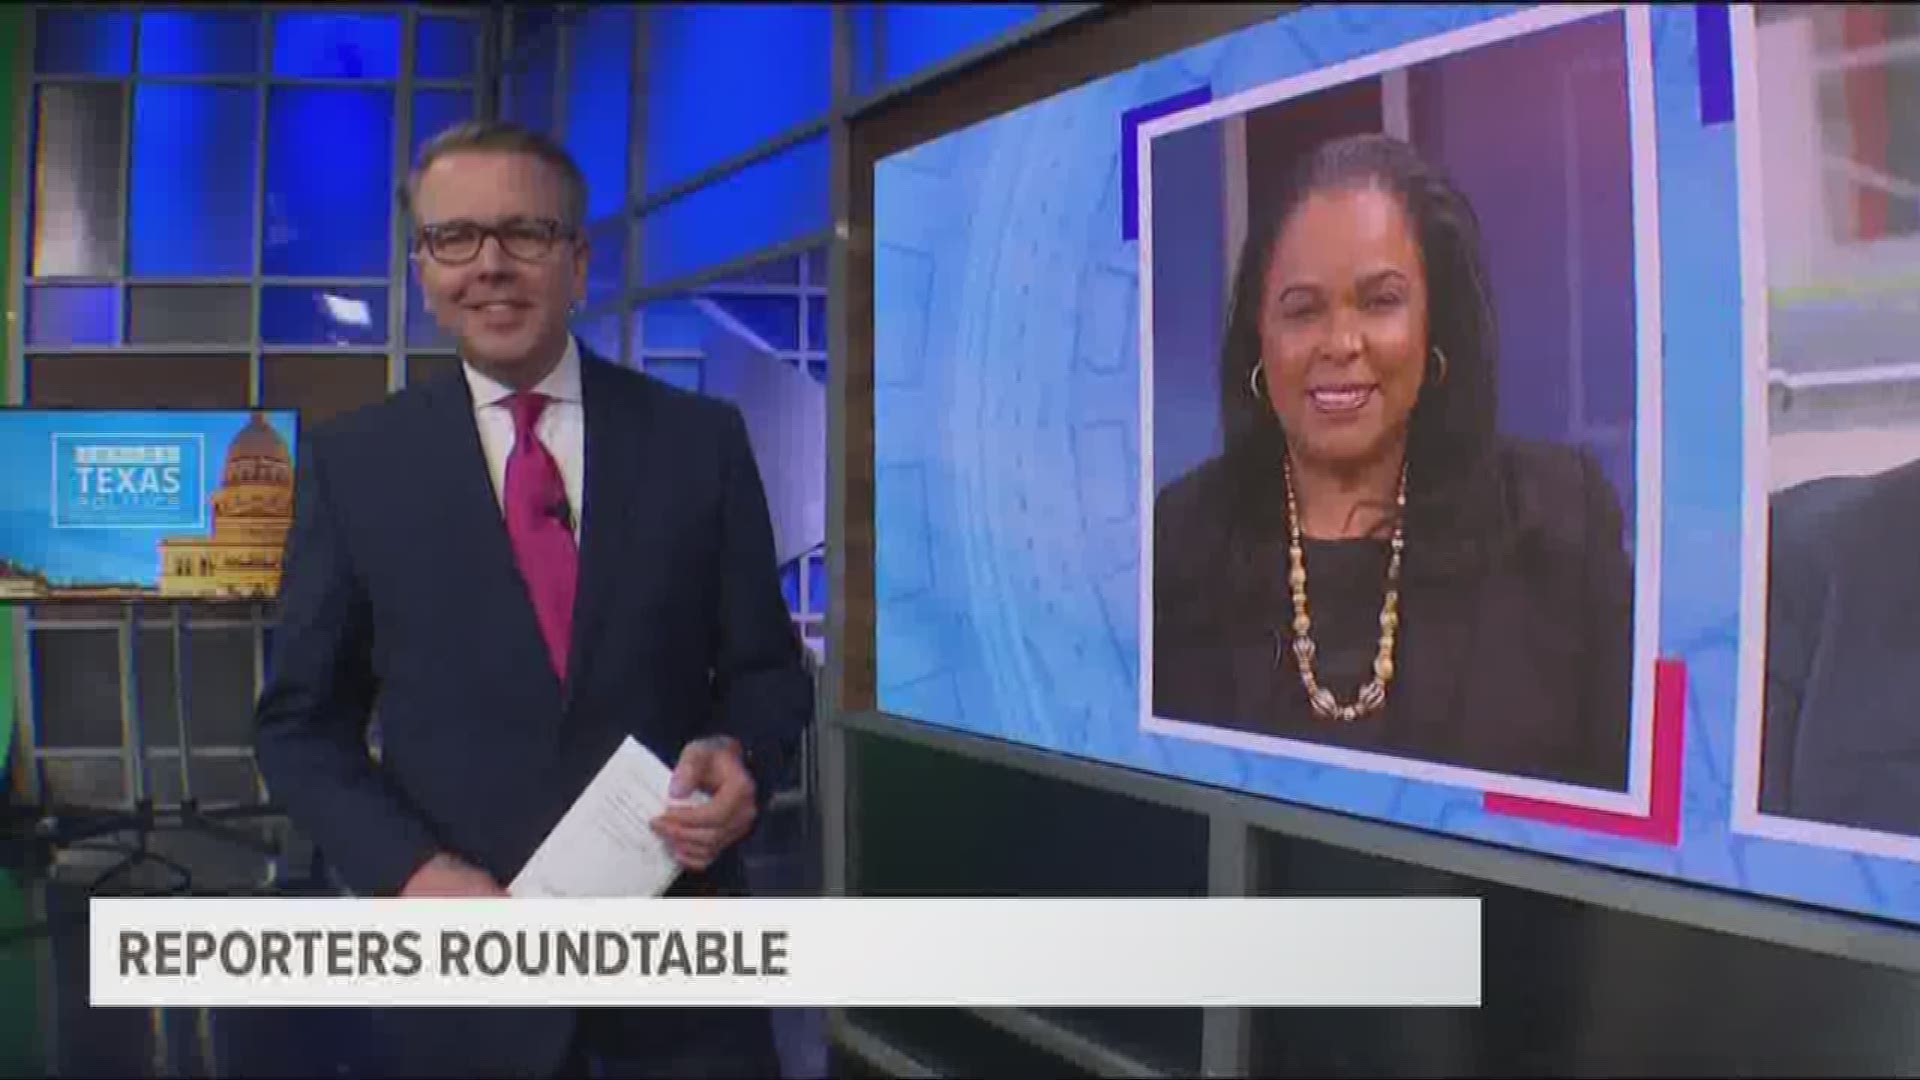 Reporters Roundtable puts the headlines in perspective each week. Ross Ramsey and Bud Kennedy returned along with Berna Dean Steptoe, WFAA's political producer. Ross, Bud, and Berna Dean discussed how Texas Republicans are dealing with the recent high-pro